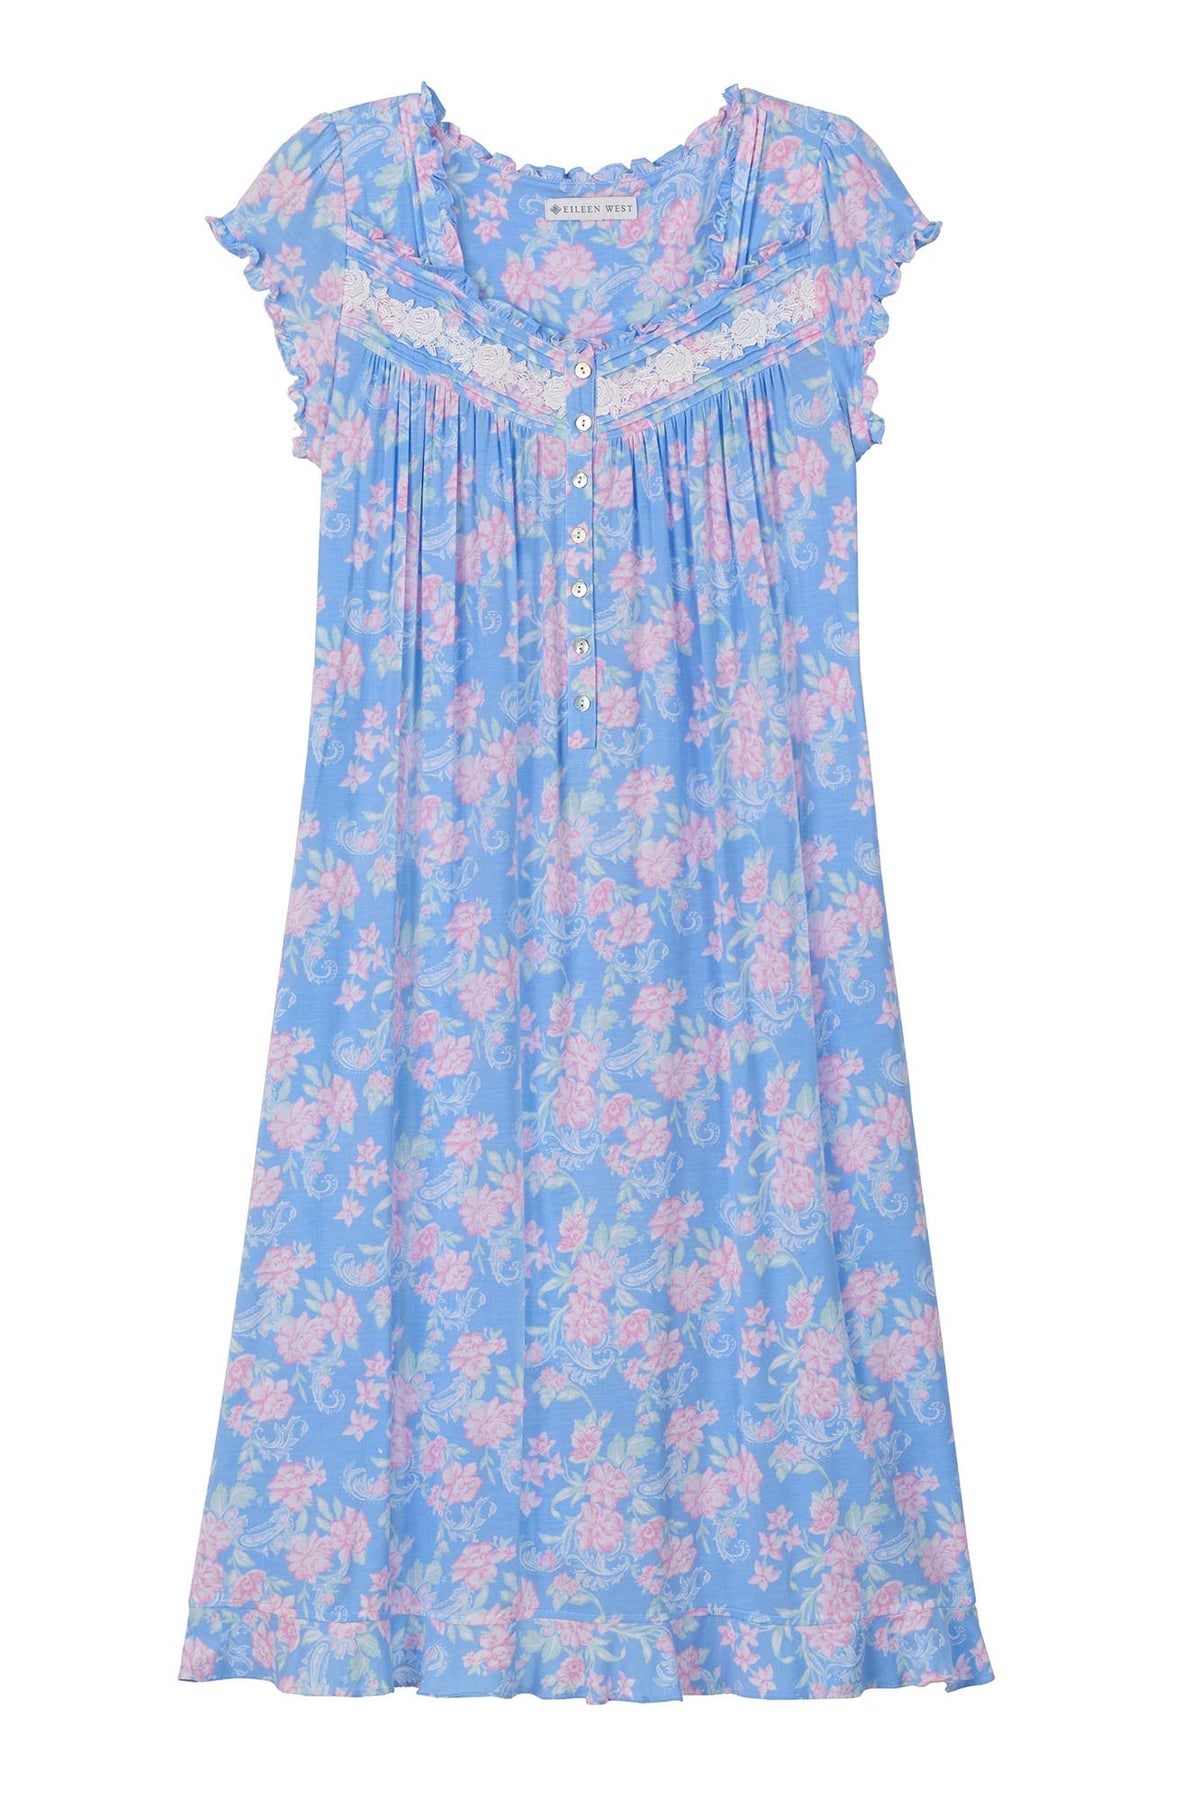 A lady wearing blue cap sleeve waltz nightgown with paisley floral print.